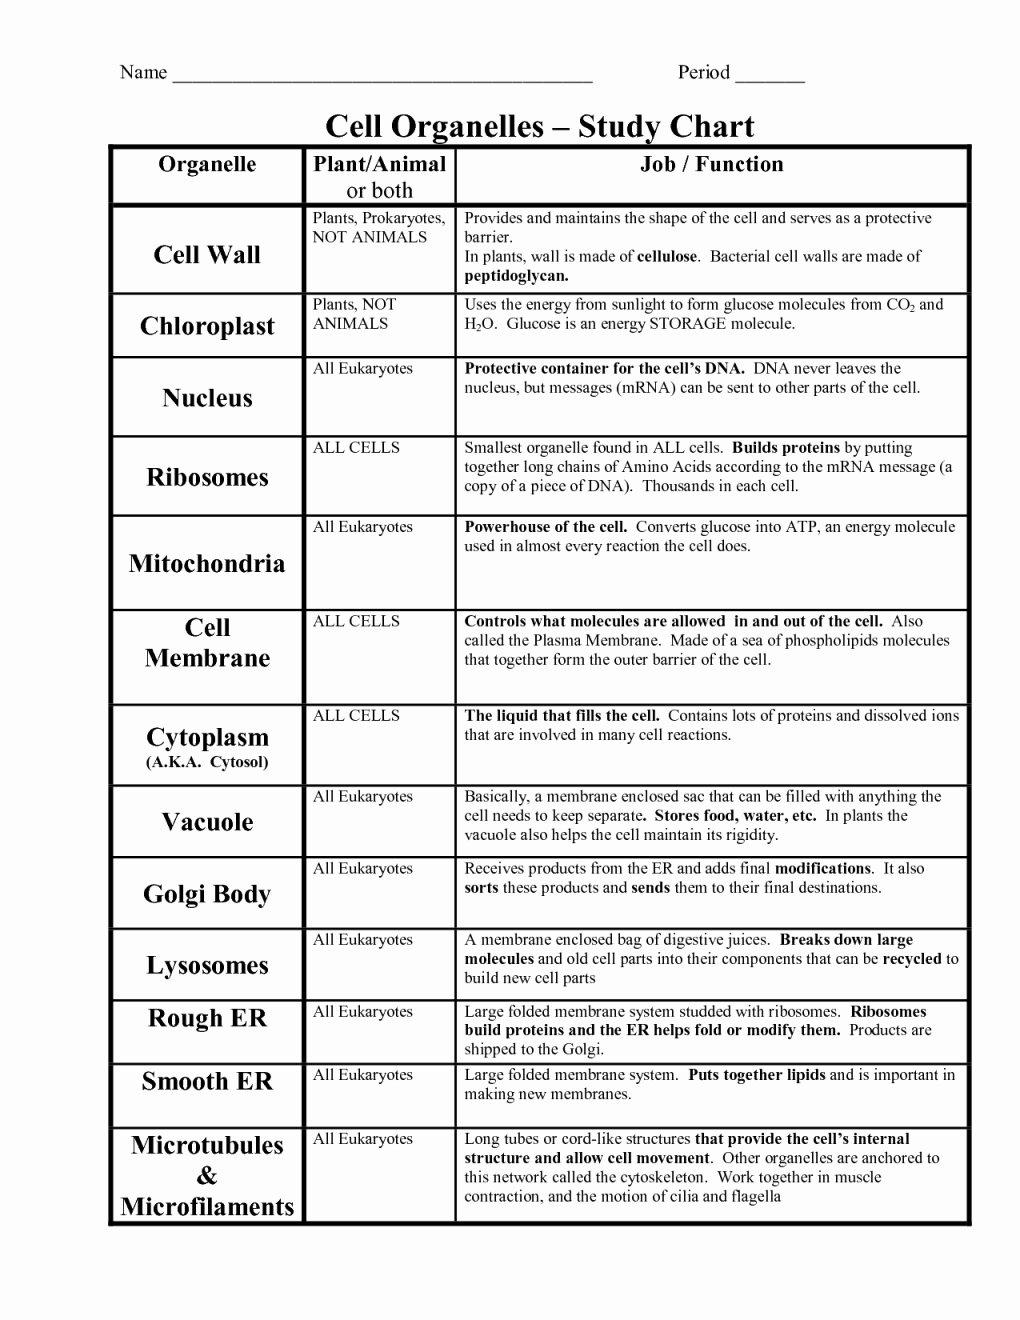 Cell organelles Worksheet Answers Luxury Cell organelles Worksheet Answer Key